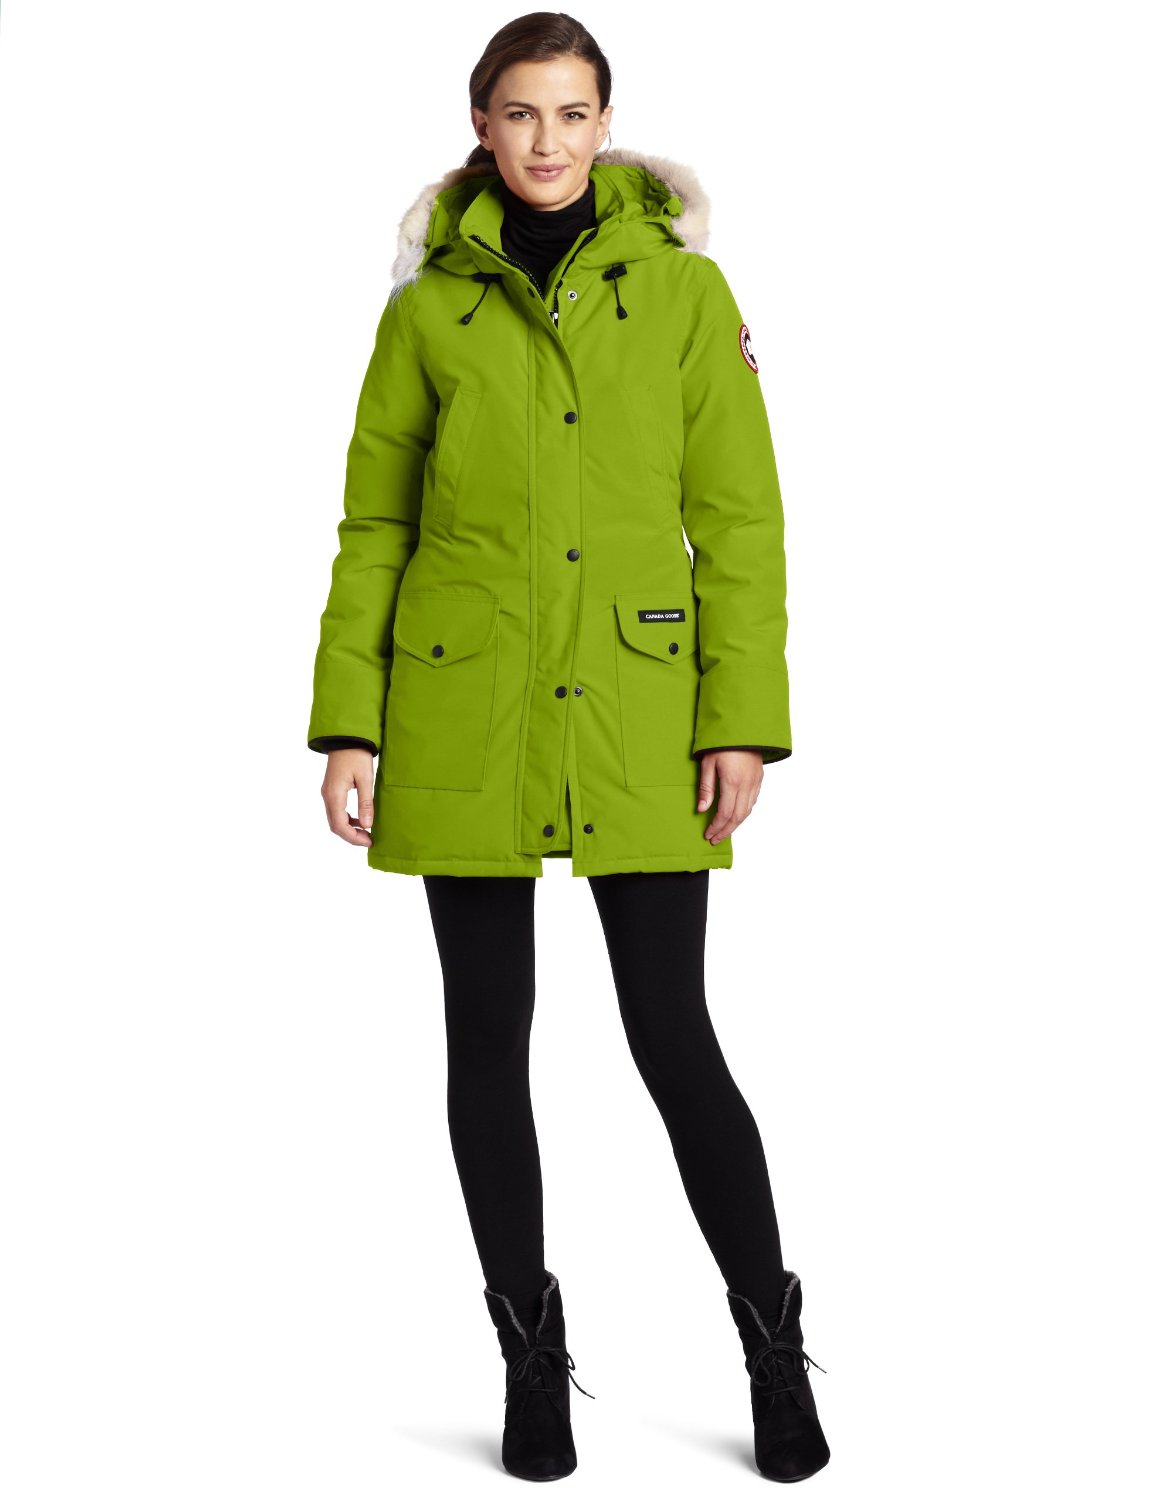 Canada Goose toronto outlet 2016 - Canada Goose Trillium Parka best winter Parka? - My Fashion Wants